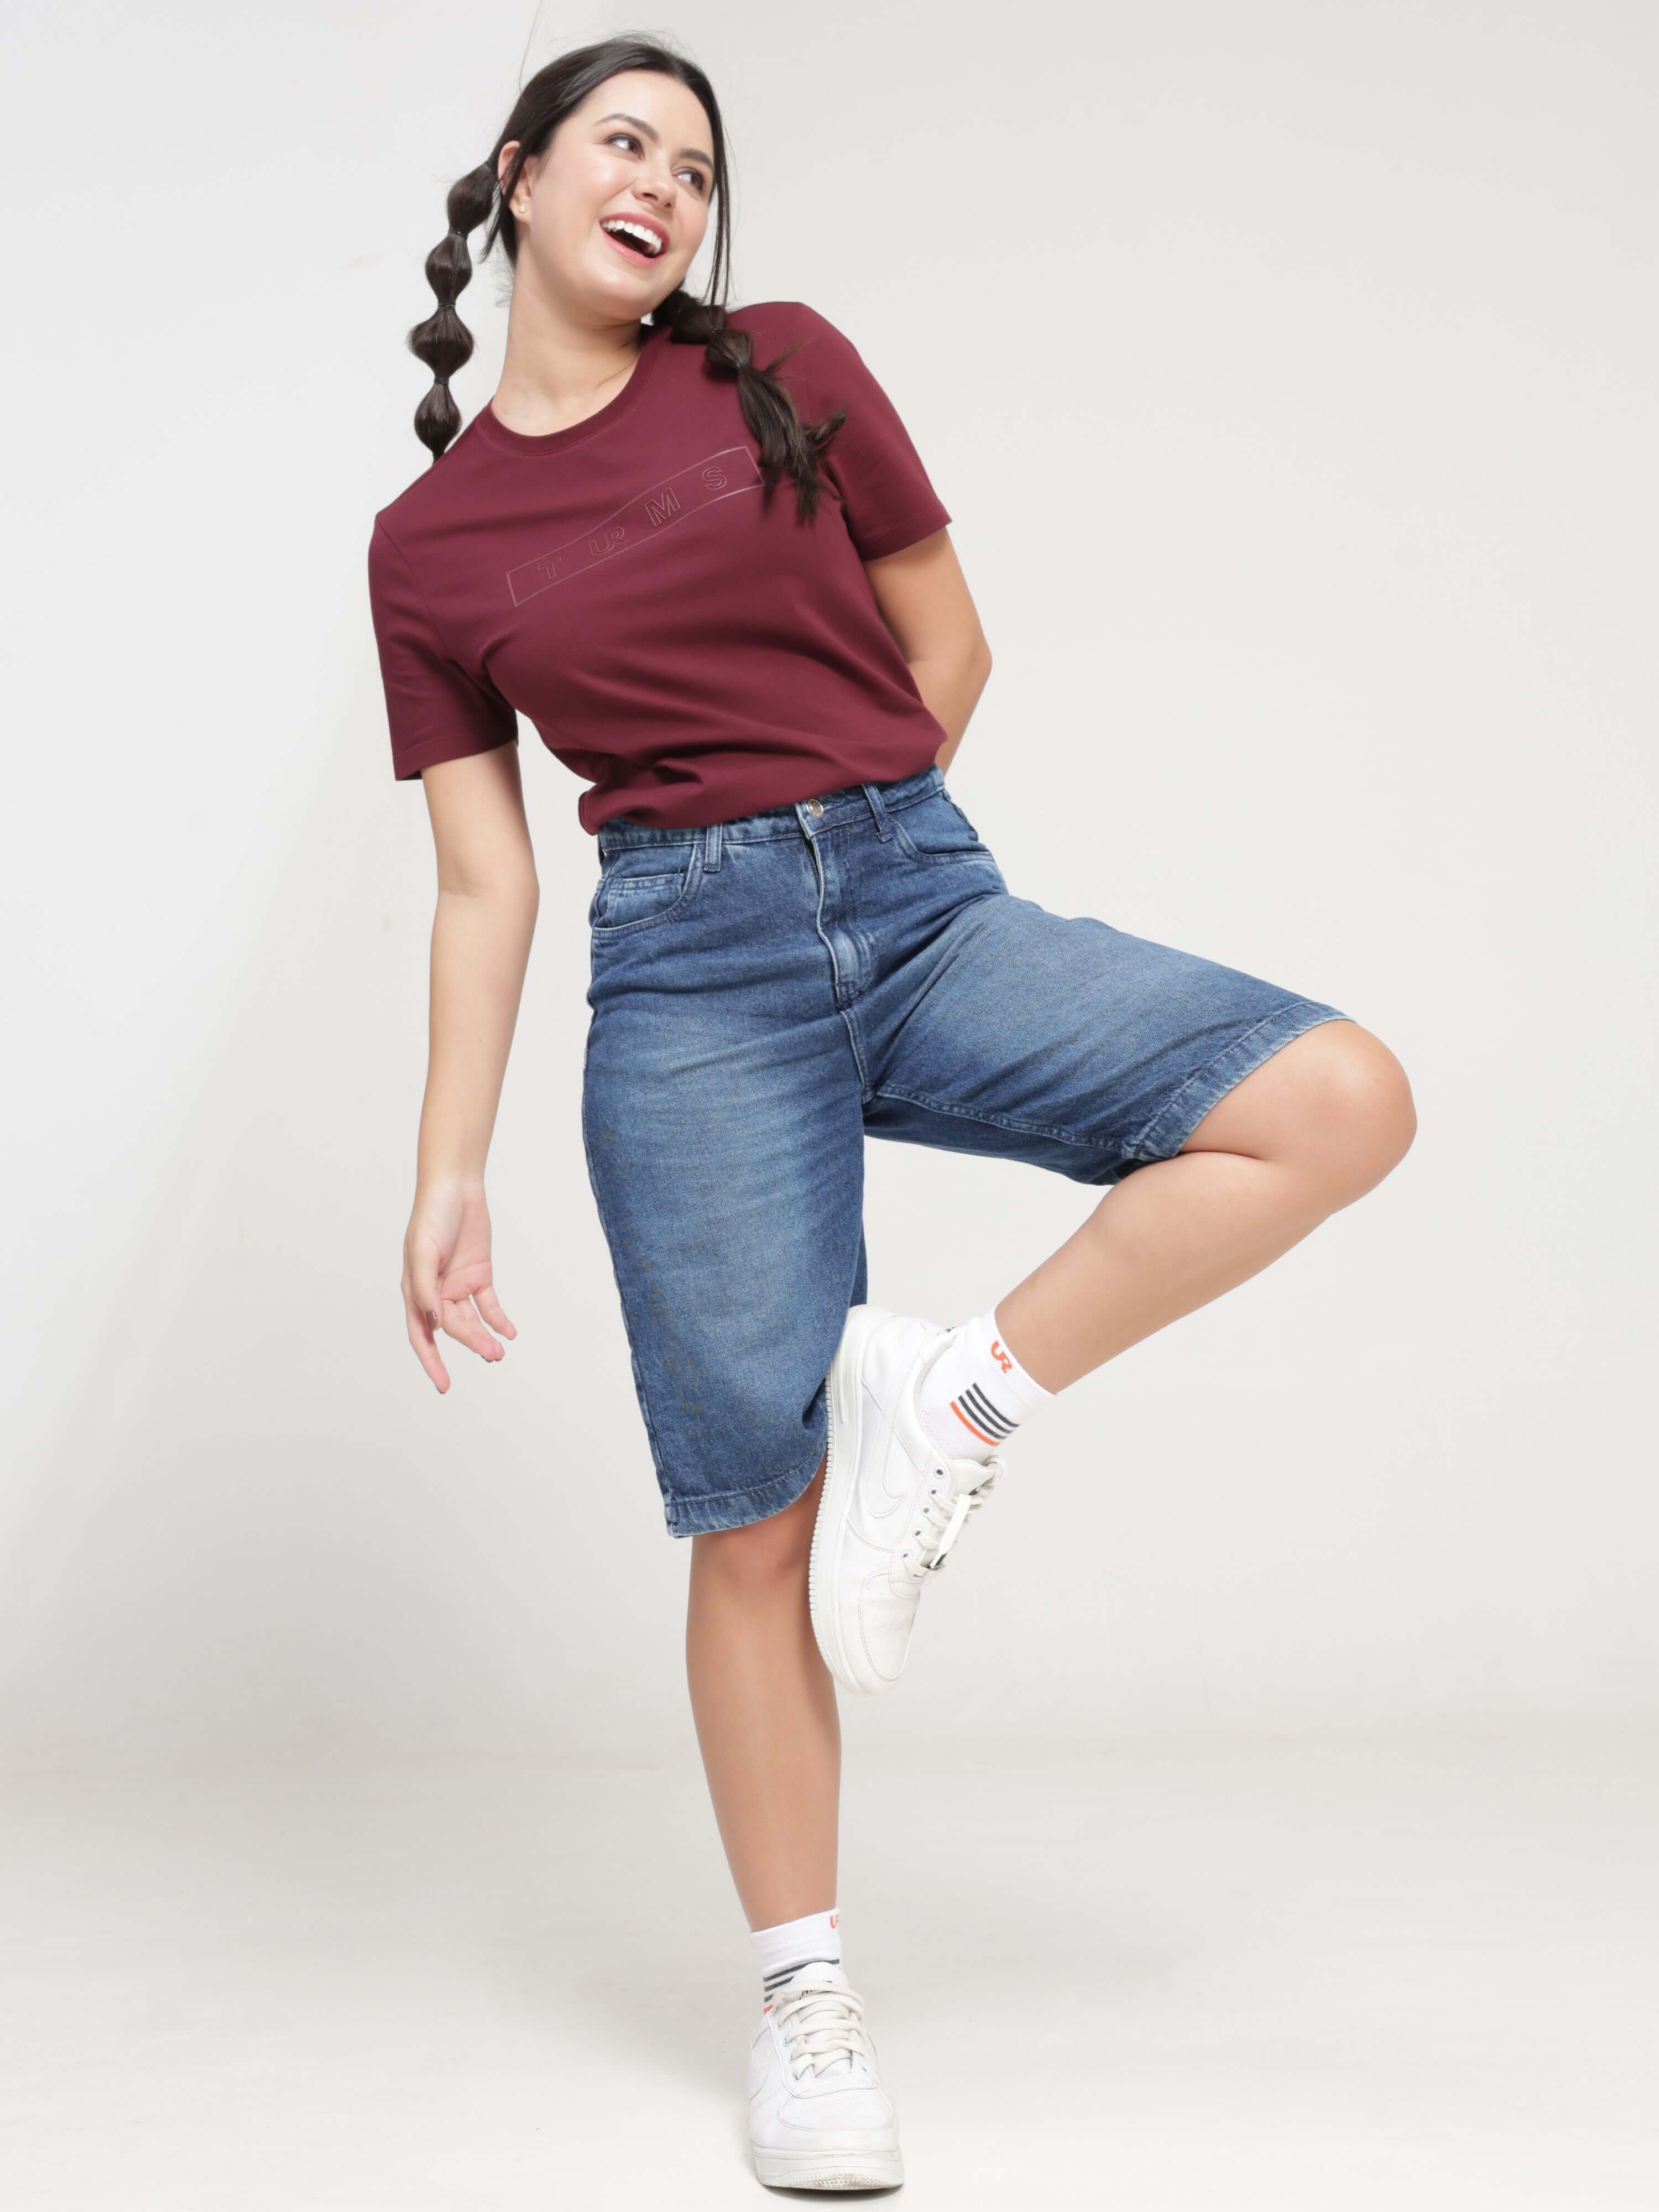 Woman wearing Burgundy Elite anti-stain and anti-odor Turms T-shirt with denim shorts, showcasing the tailored fit and stretchable fabric.